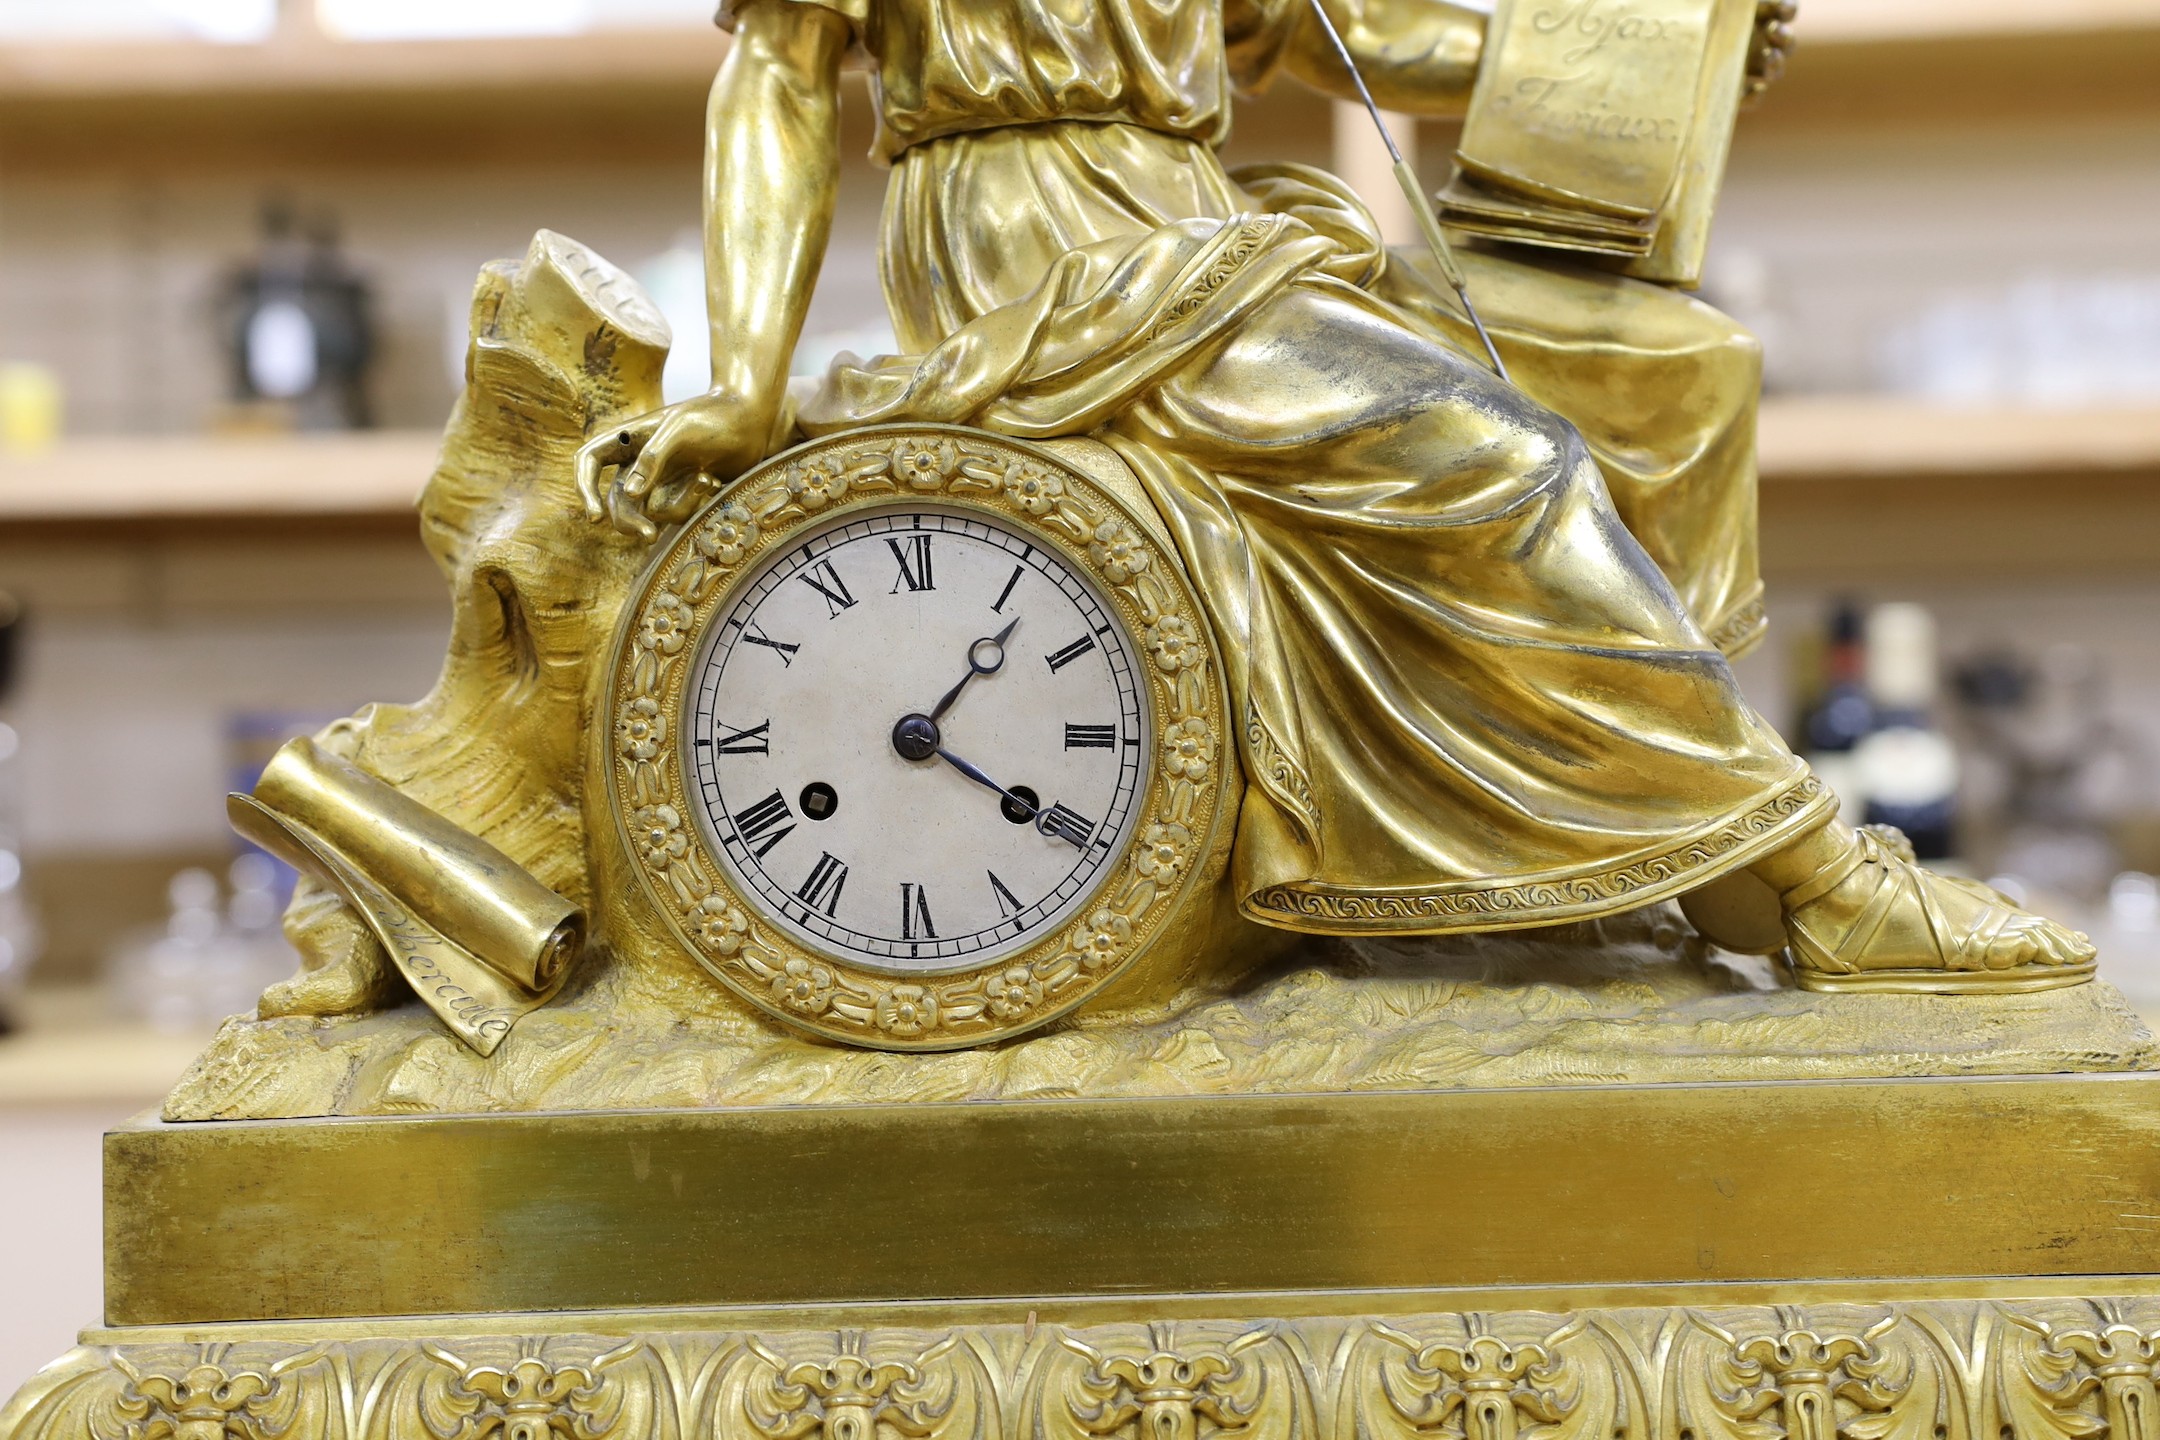 A large ornate French ormolu ‘Hercules’ mantel clock, second quarter 19th century, 62cm tall - Image 3 of 5